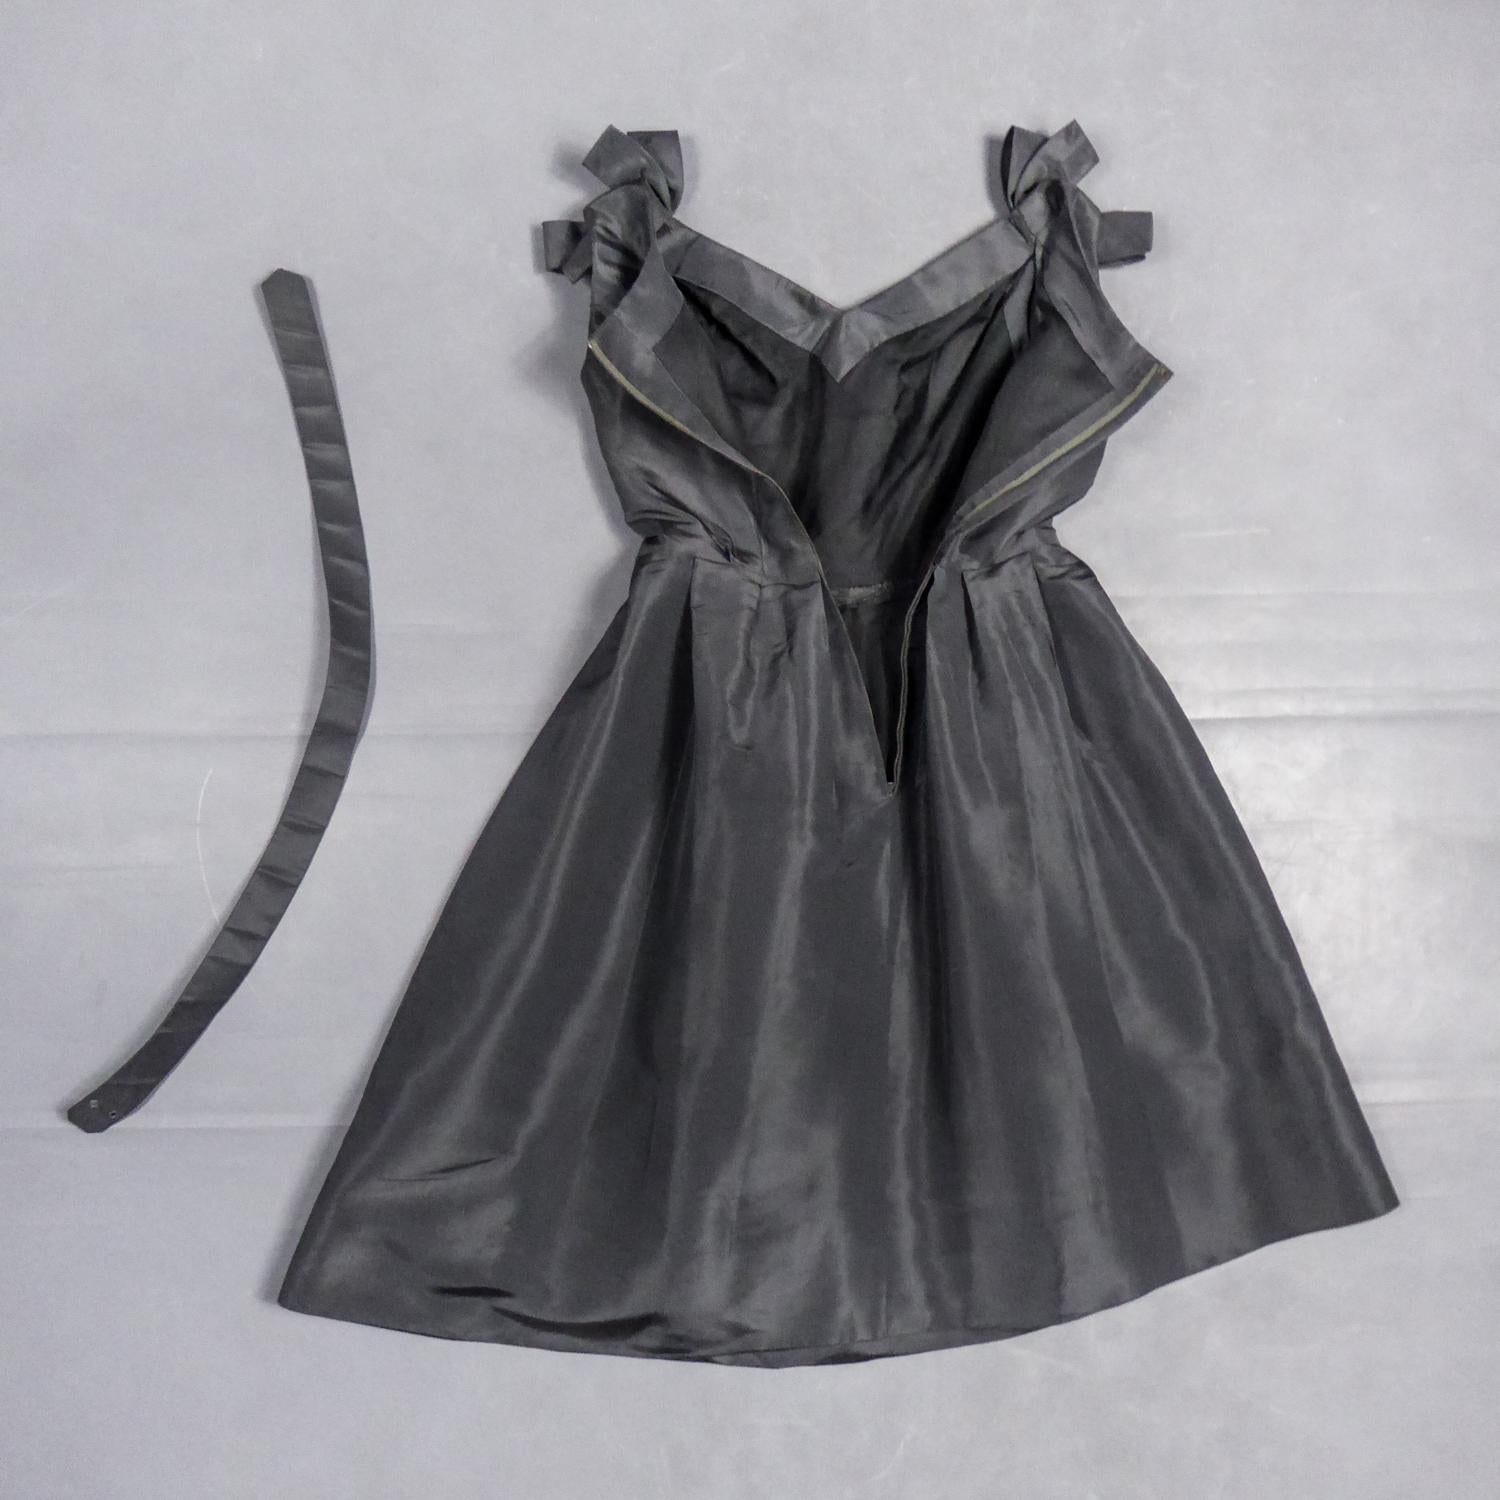 Circa 1958/1960

France

Beautiful anthracite gray silk faille cocktail dress from the period of Yves Mathieu Saint Laurent at the head of Maison Dior between 1958 and 1960. From the famous Trapèze line, this dress with fitted bust, V-neck and